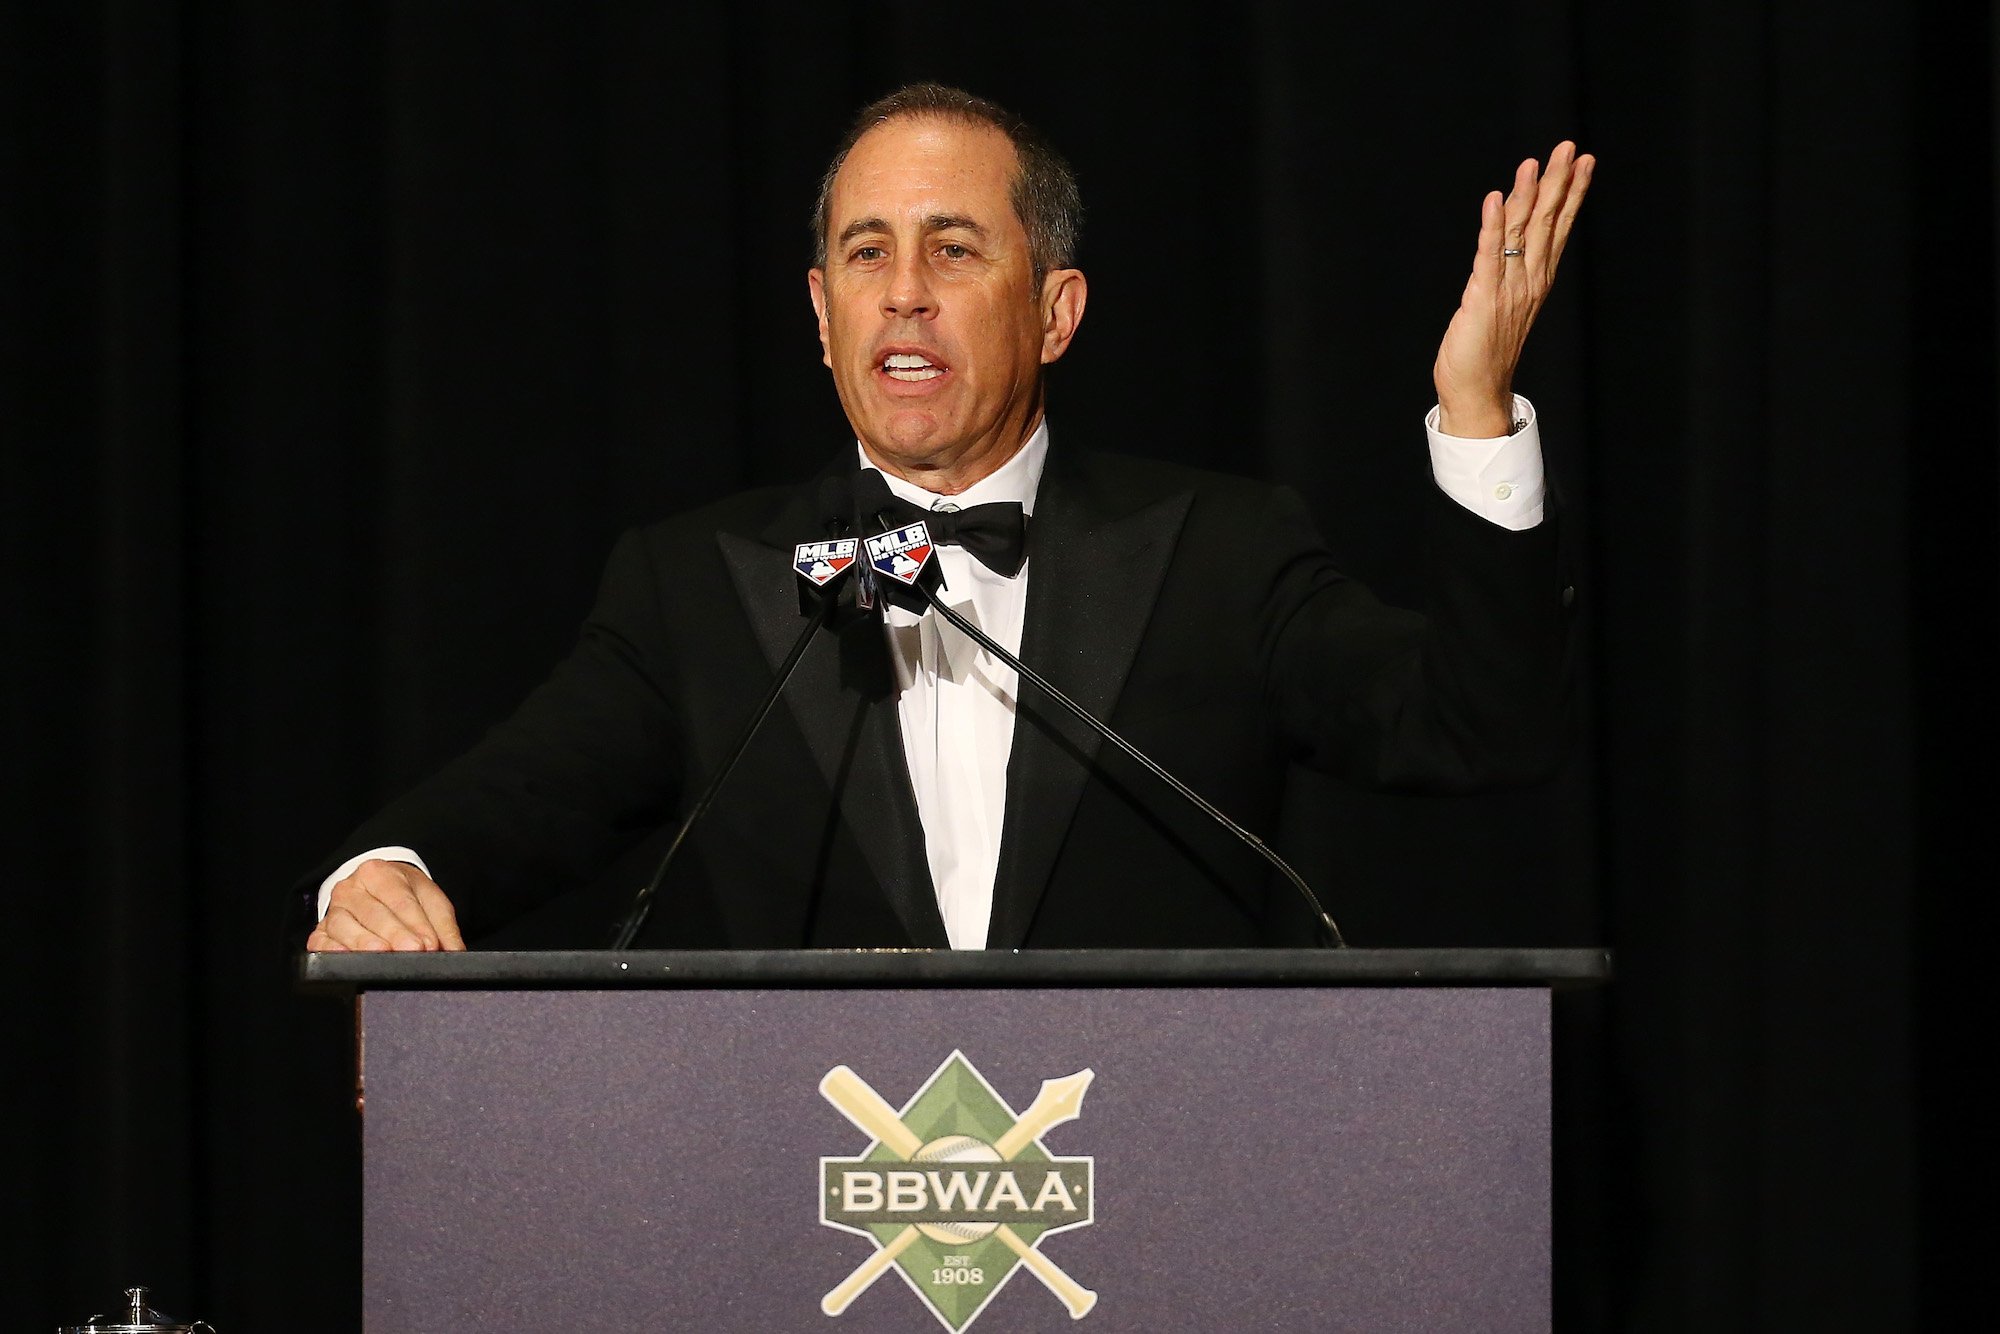 Jerry Seinfeld gives a speech at the New York Baseball Writers dinner